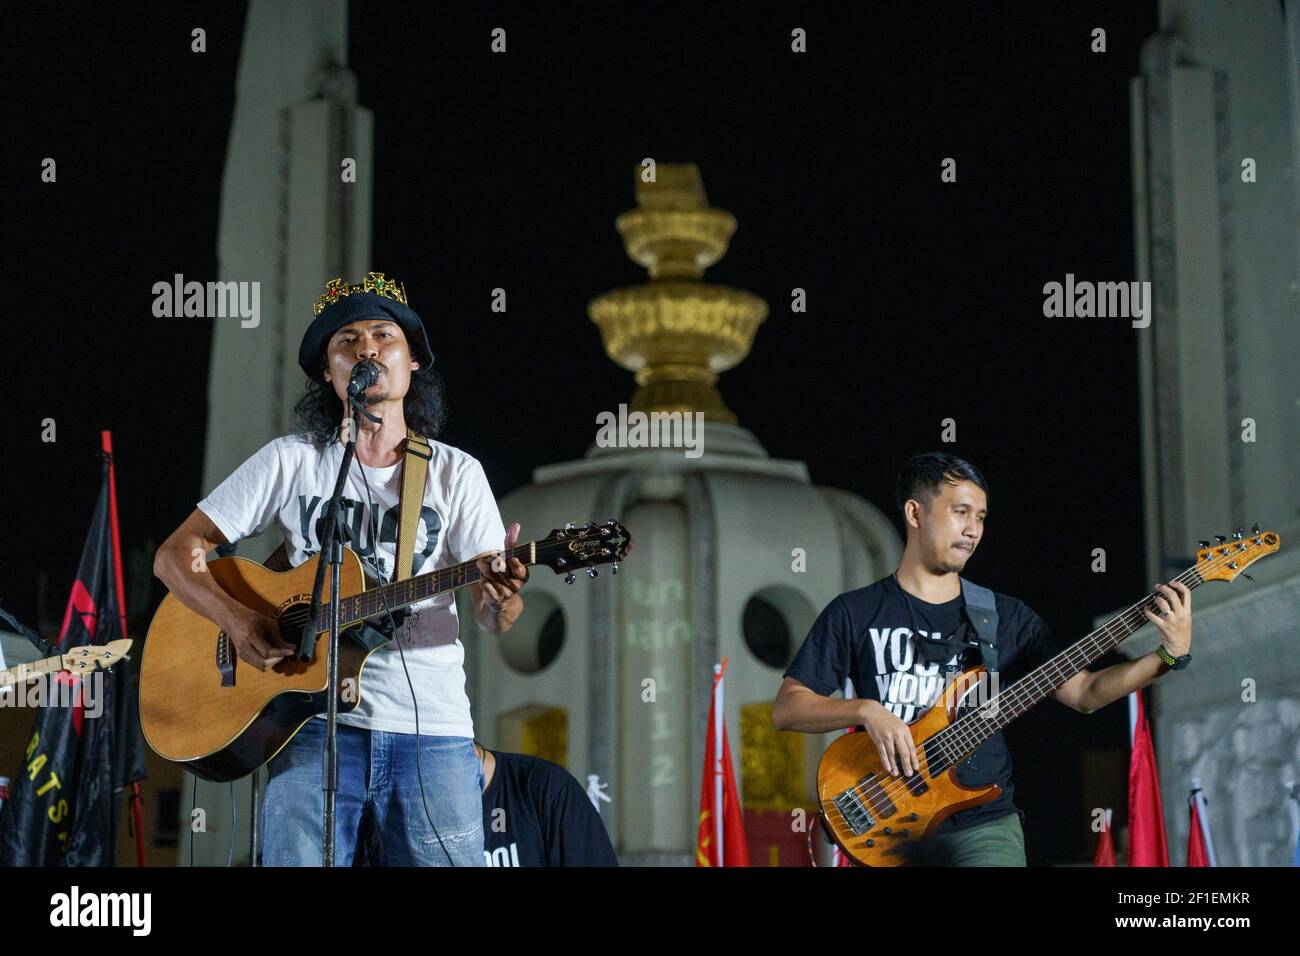 'Commoners Band' doing a live performance in front of Democracy monument during the demonstration. A group of protestors led by Jatupat 'Pai' Boonpattararaksa, one of the Thai pro-democracy leaders arrives at the Democracy monument while protesting against the imprisonment of 4 pro-democracy activists (Somyot Pruksakasemsuk, Patiwat Saraiyam, Parit 'Penguin' Chivarak, and Anon Nampa) who were arrested under the lese majeste law (Article 112 of the Thai criminal code) and demand the reform of the monarchy and abolition of the lese-majesty law. Stock Photo